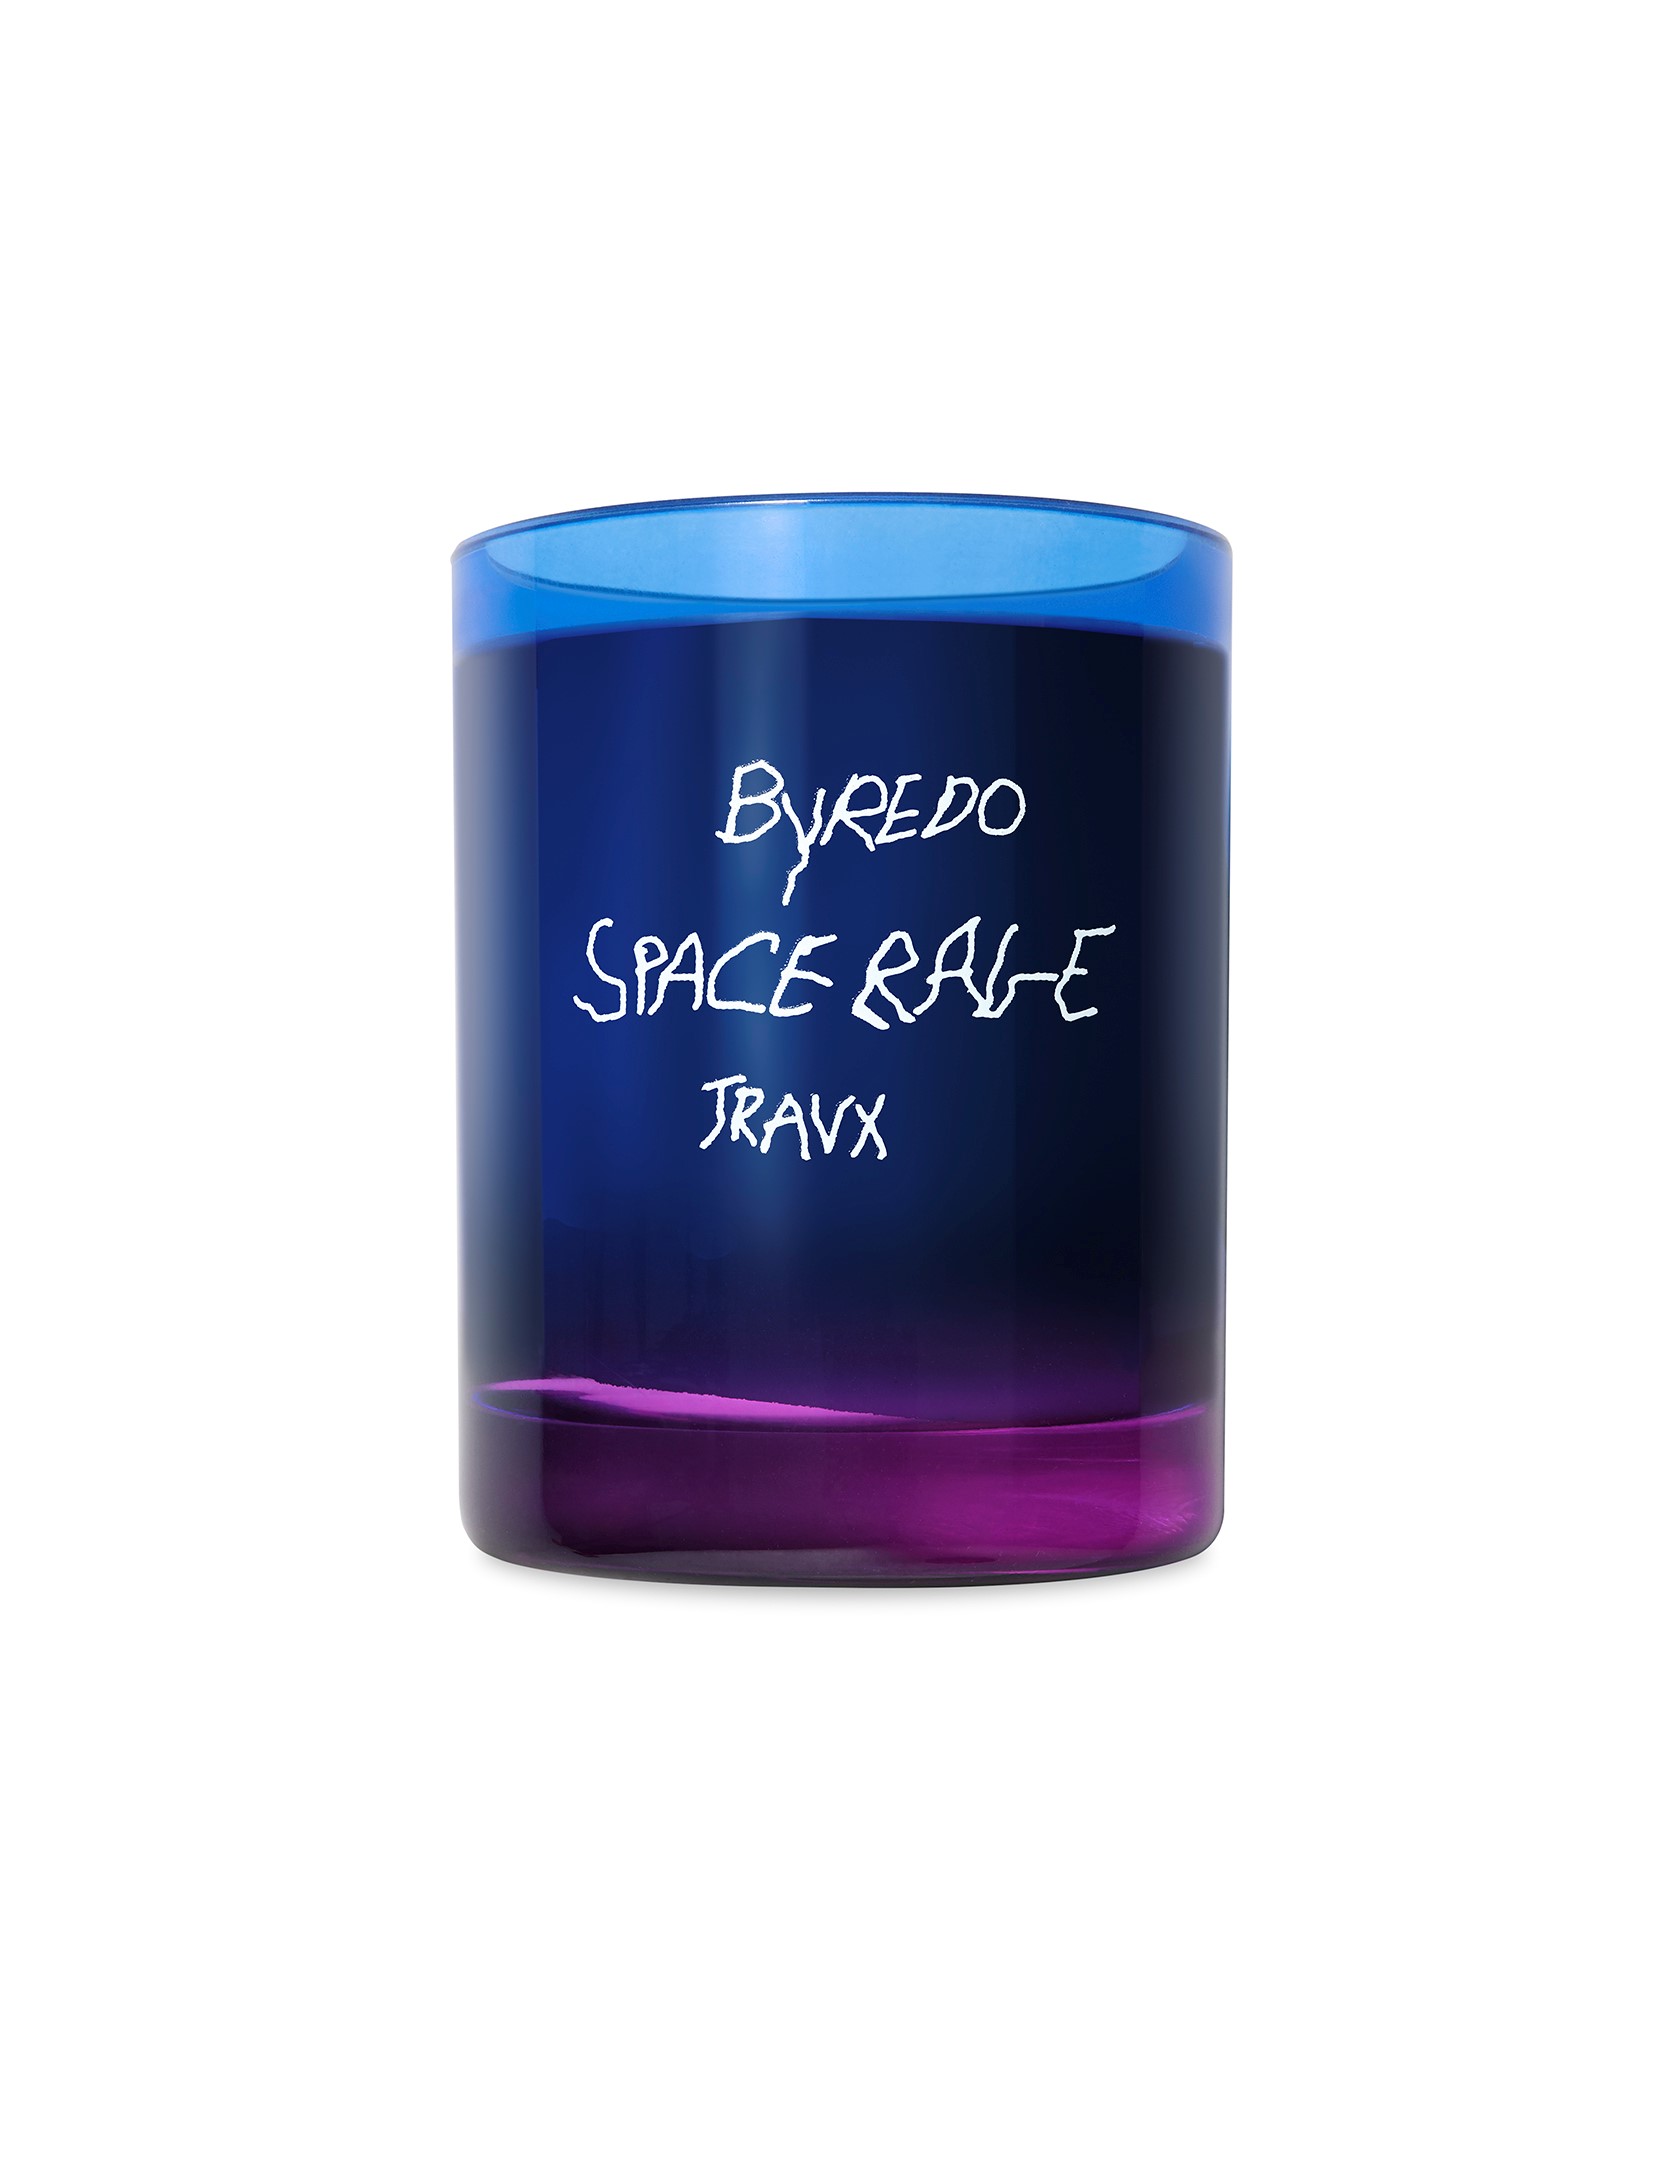 PHOTO: Travis Scott and Byredo to launch space-inspired scents.